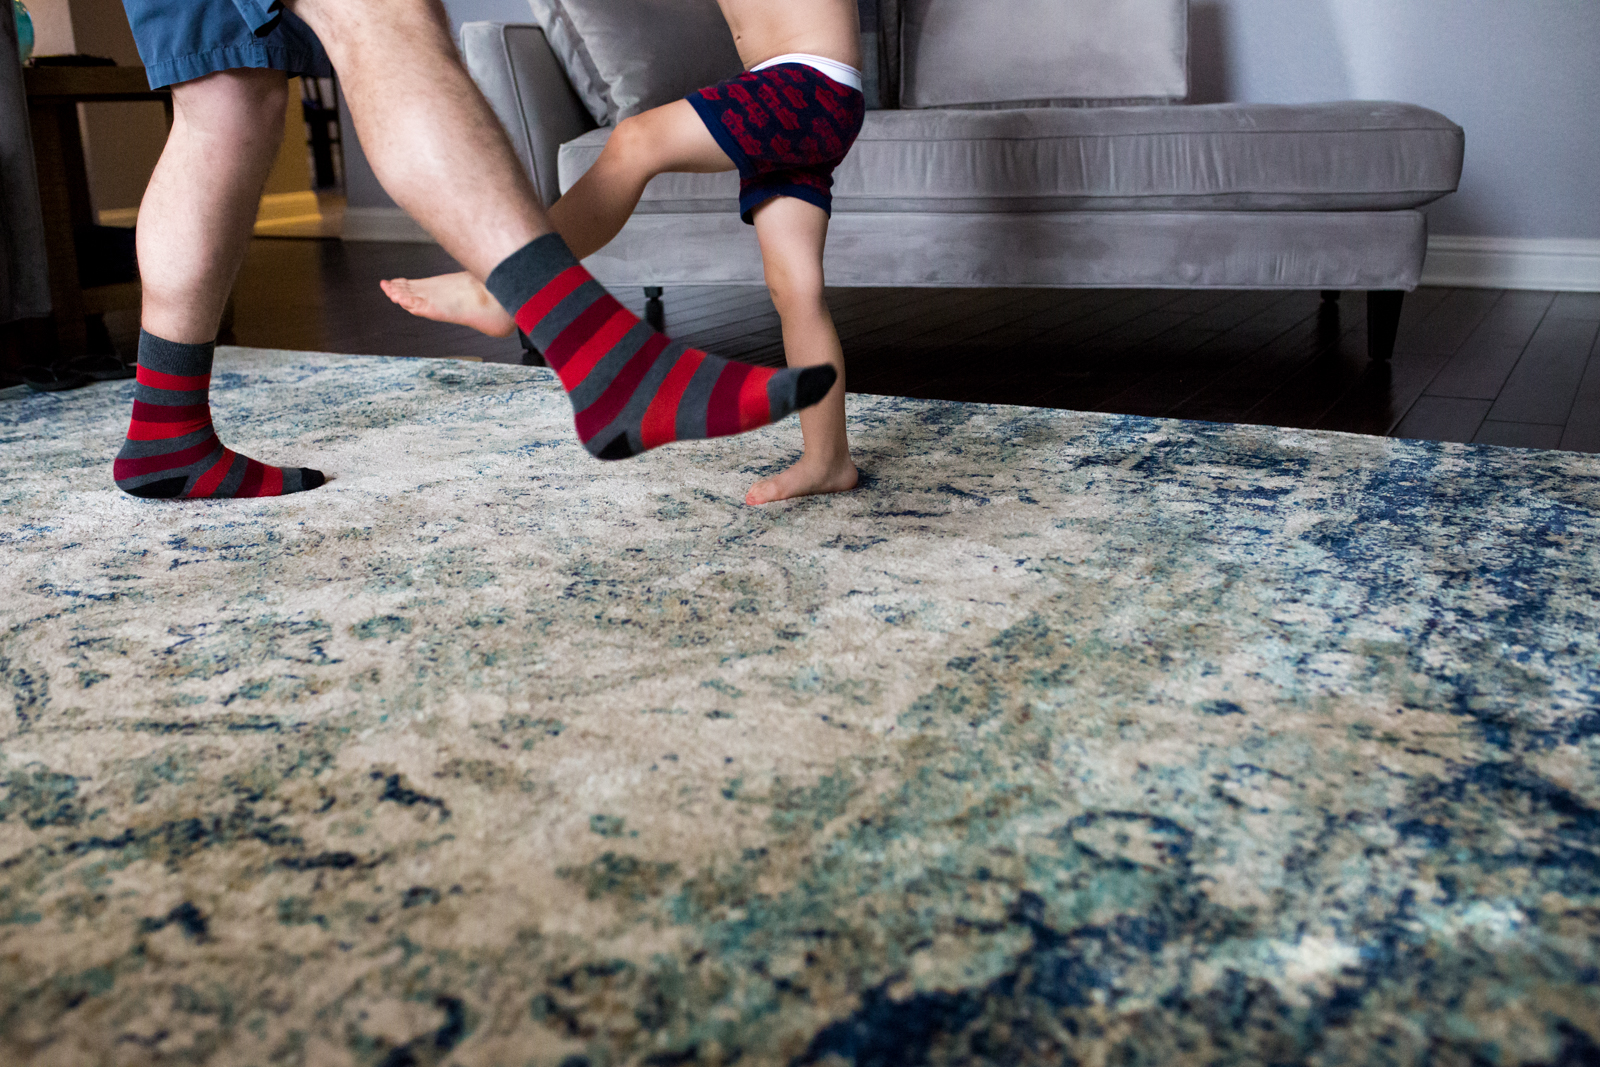 Lawren Rose Photography takes a minimalist photo of a dad and son dancing where dad is wearing funky socks on the living room floor in mckinney texas